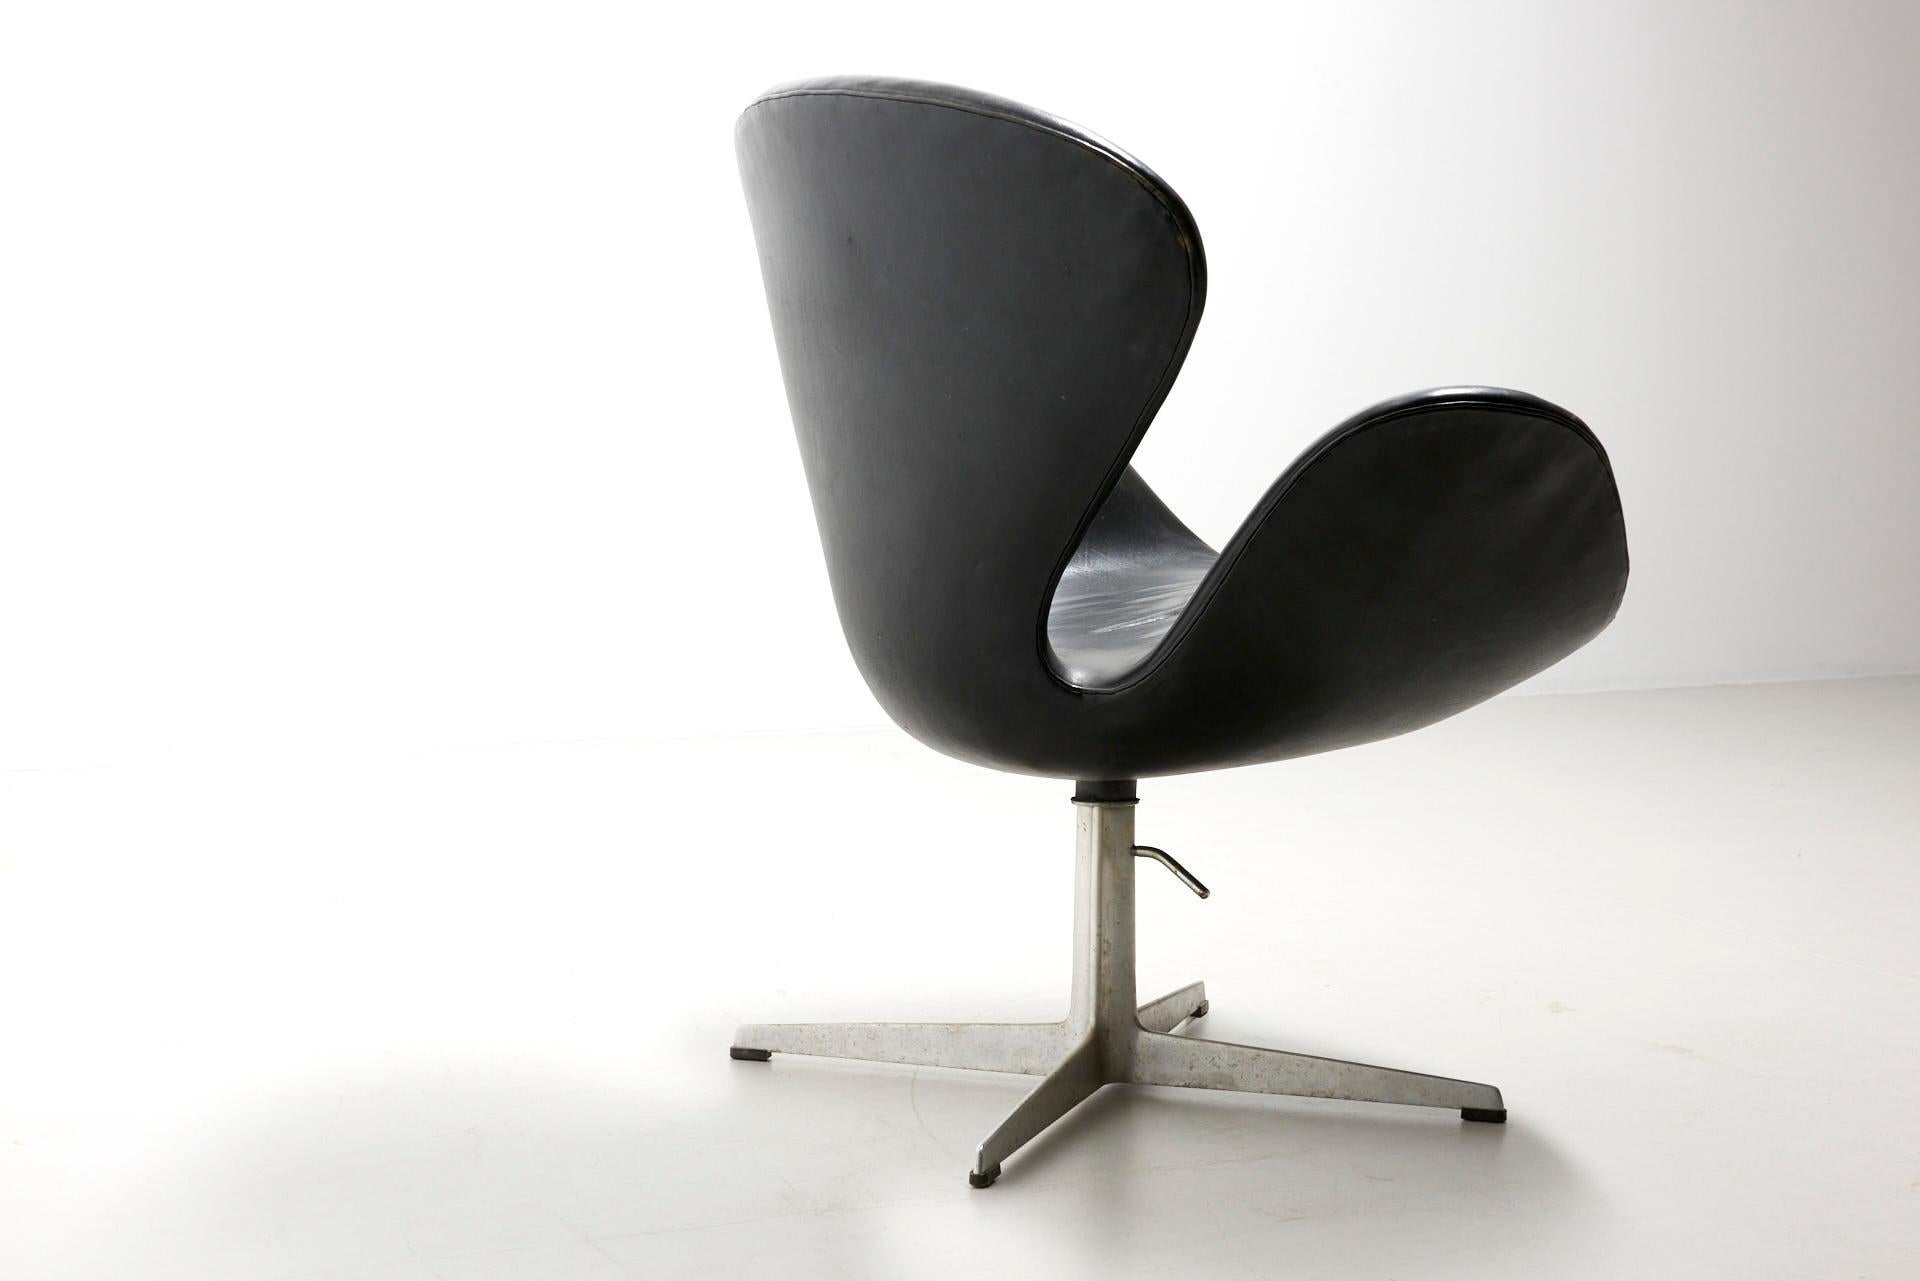 A swan lounge chair with swivel base, adjustable in height. Original black leather in good condition. Design by Arne Jacobsen in 1958 for the SAS Royal Hotel in Copenhagen. The shape of the star foot and construction of the shell indicate that this